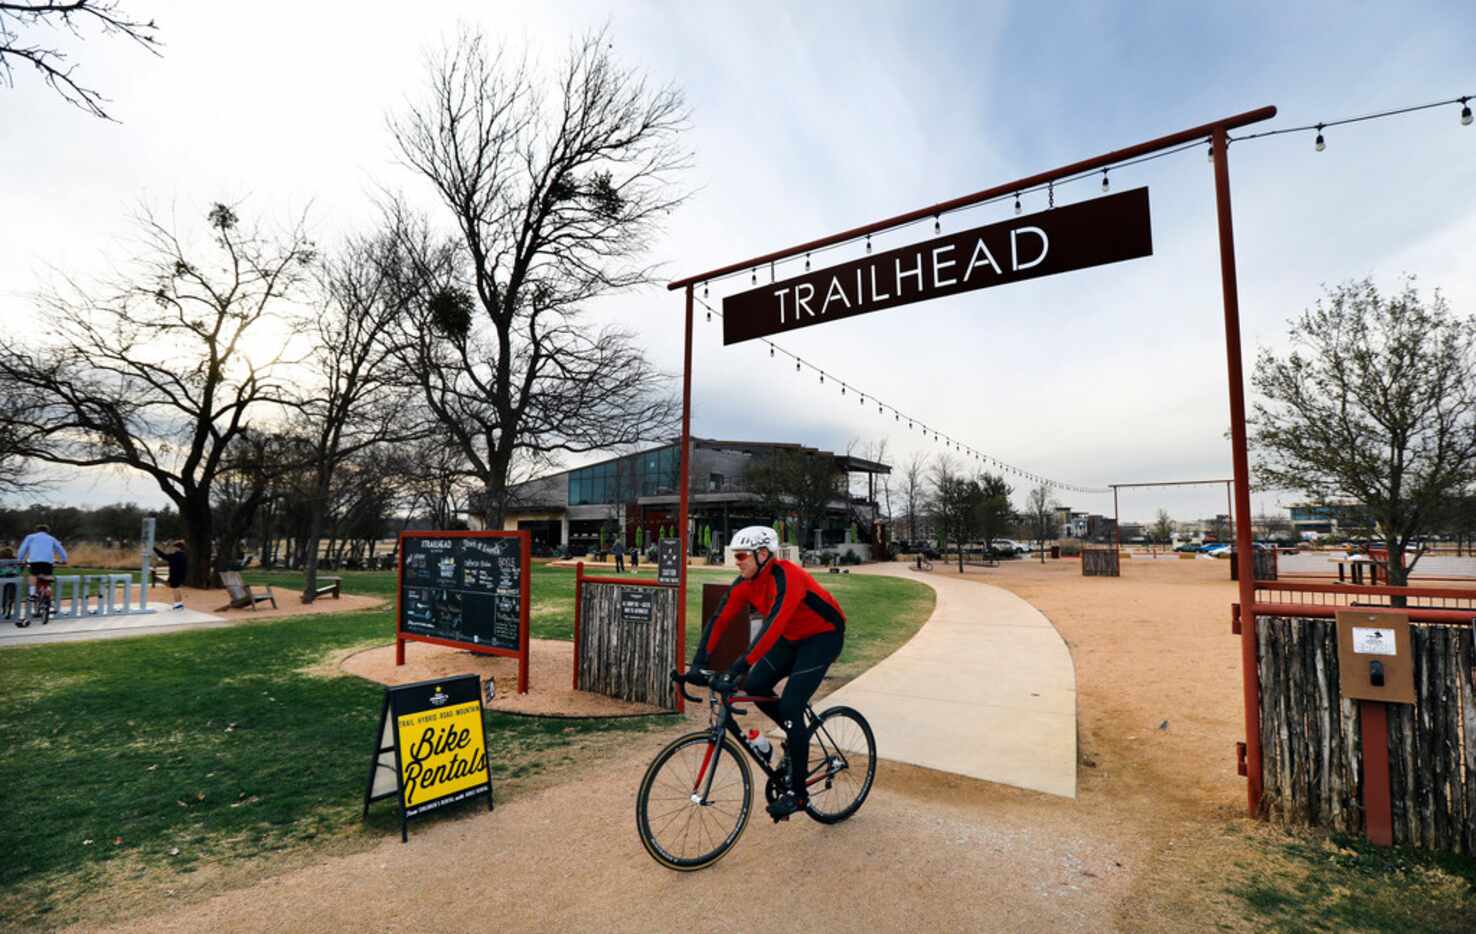 A cyclist enters the Trinity Trails at The Trailhead at Clearfork event area near Press Cafe...